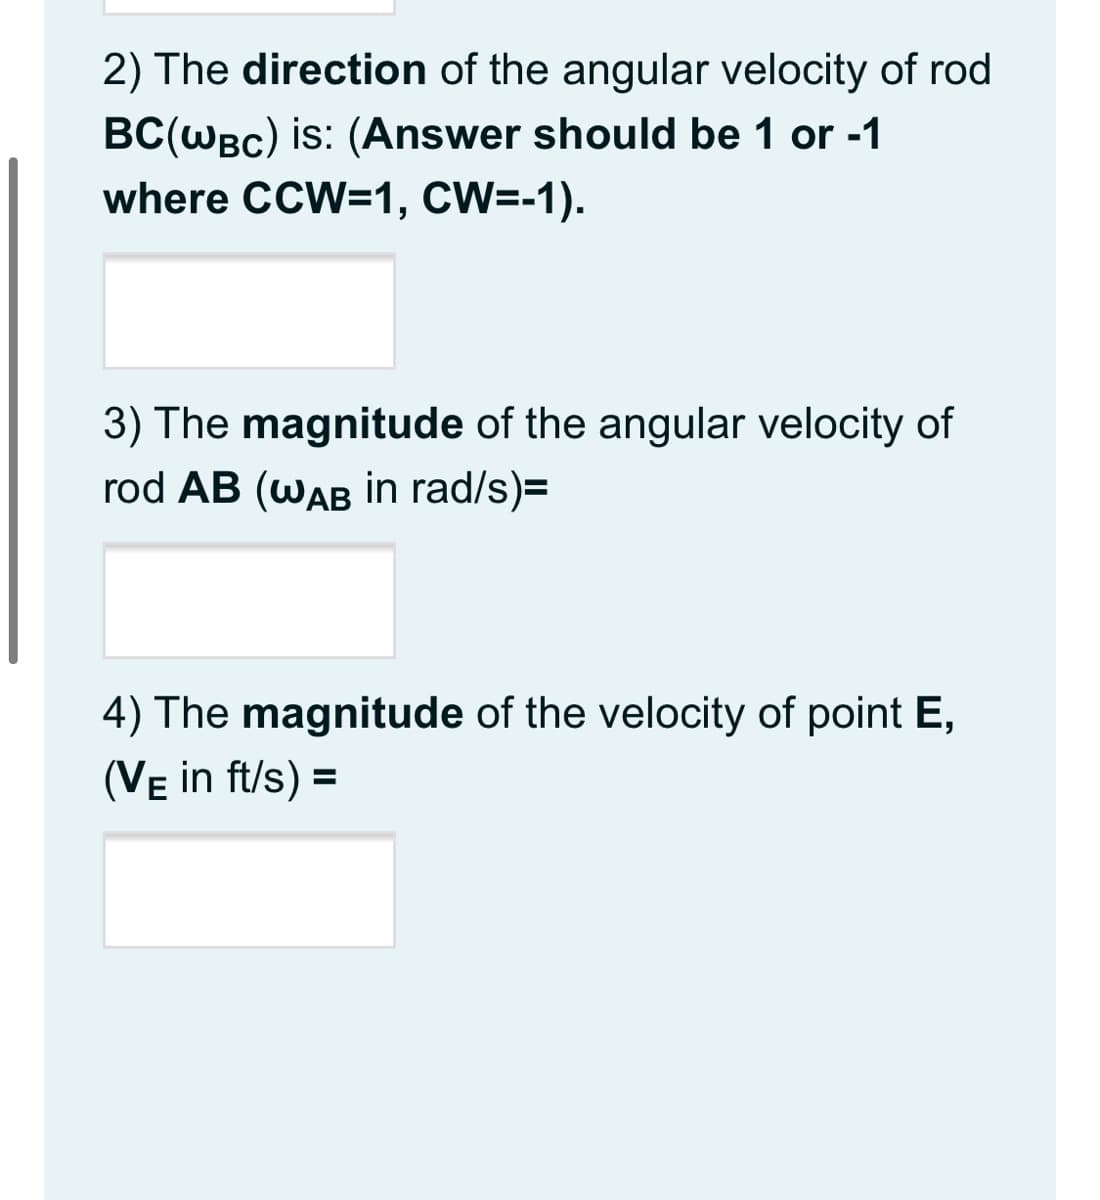 2) The direction of the angular velocity of rod
BC(WBc) is: (Answer should be 1 or -1
where CCW=1, CW=-1).
3) The magnitude of the angular velocity of
rod AB (WAB in rad/s)=
4) The magnitude of the velocity of point E,
(Ve in ft/s) =
